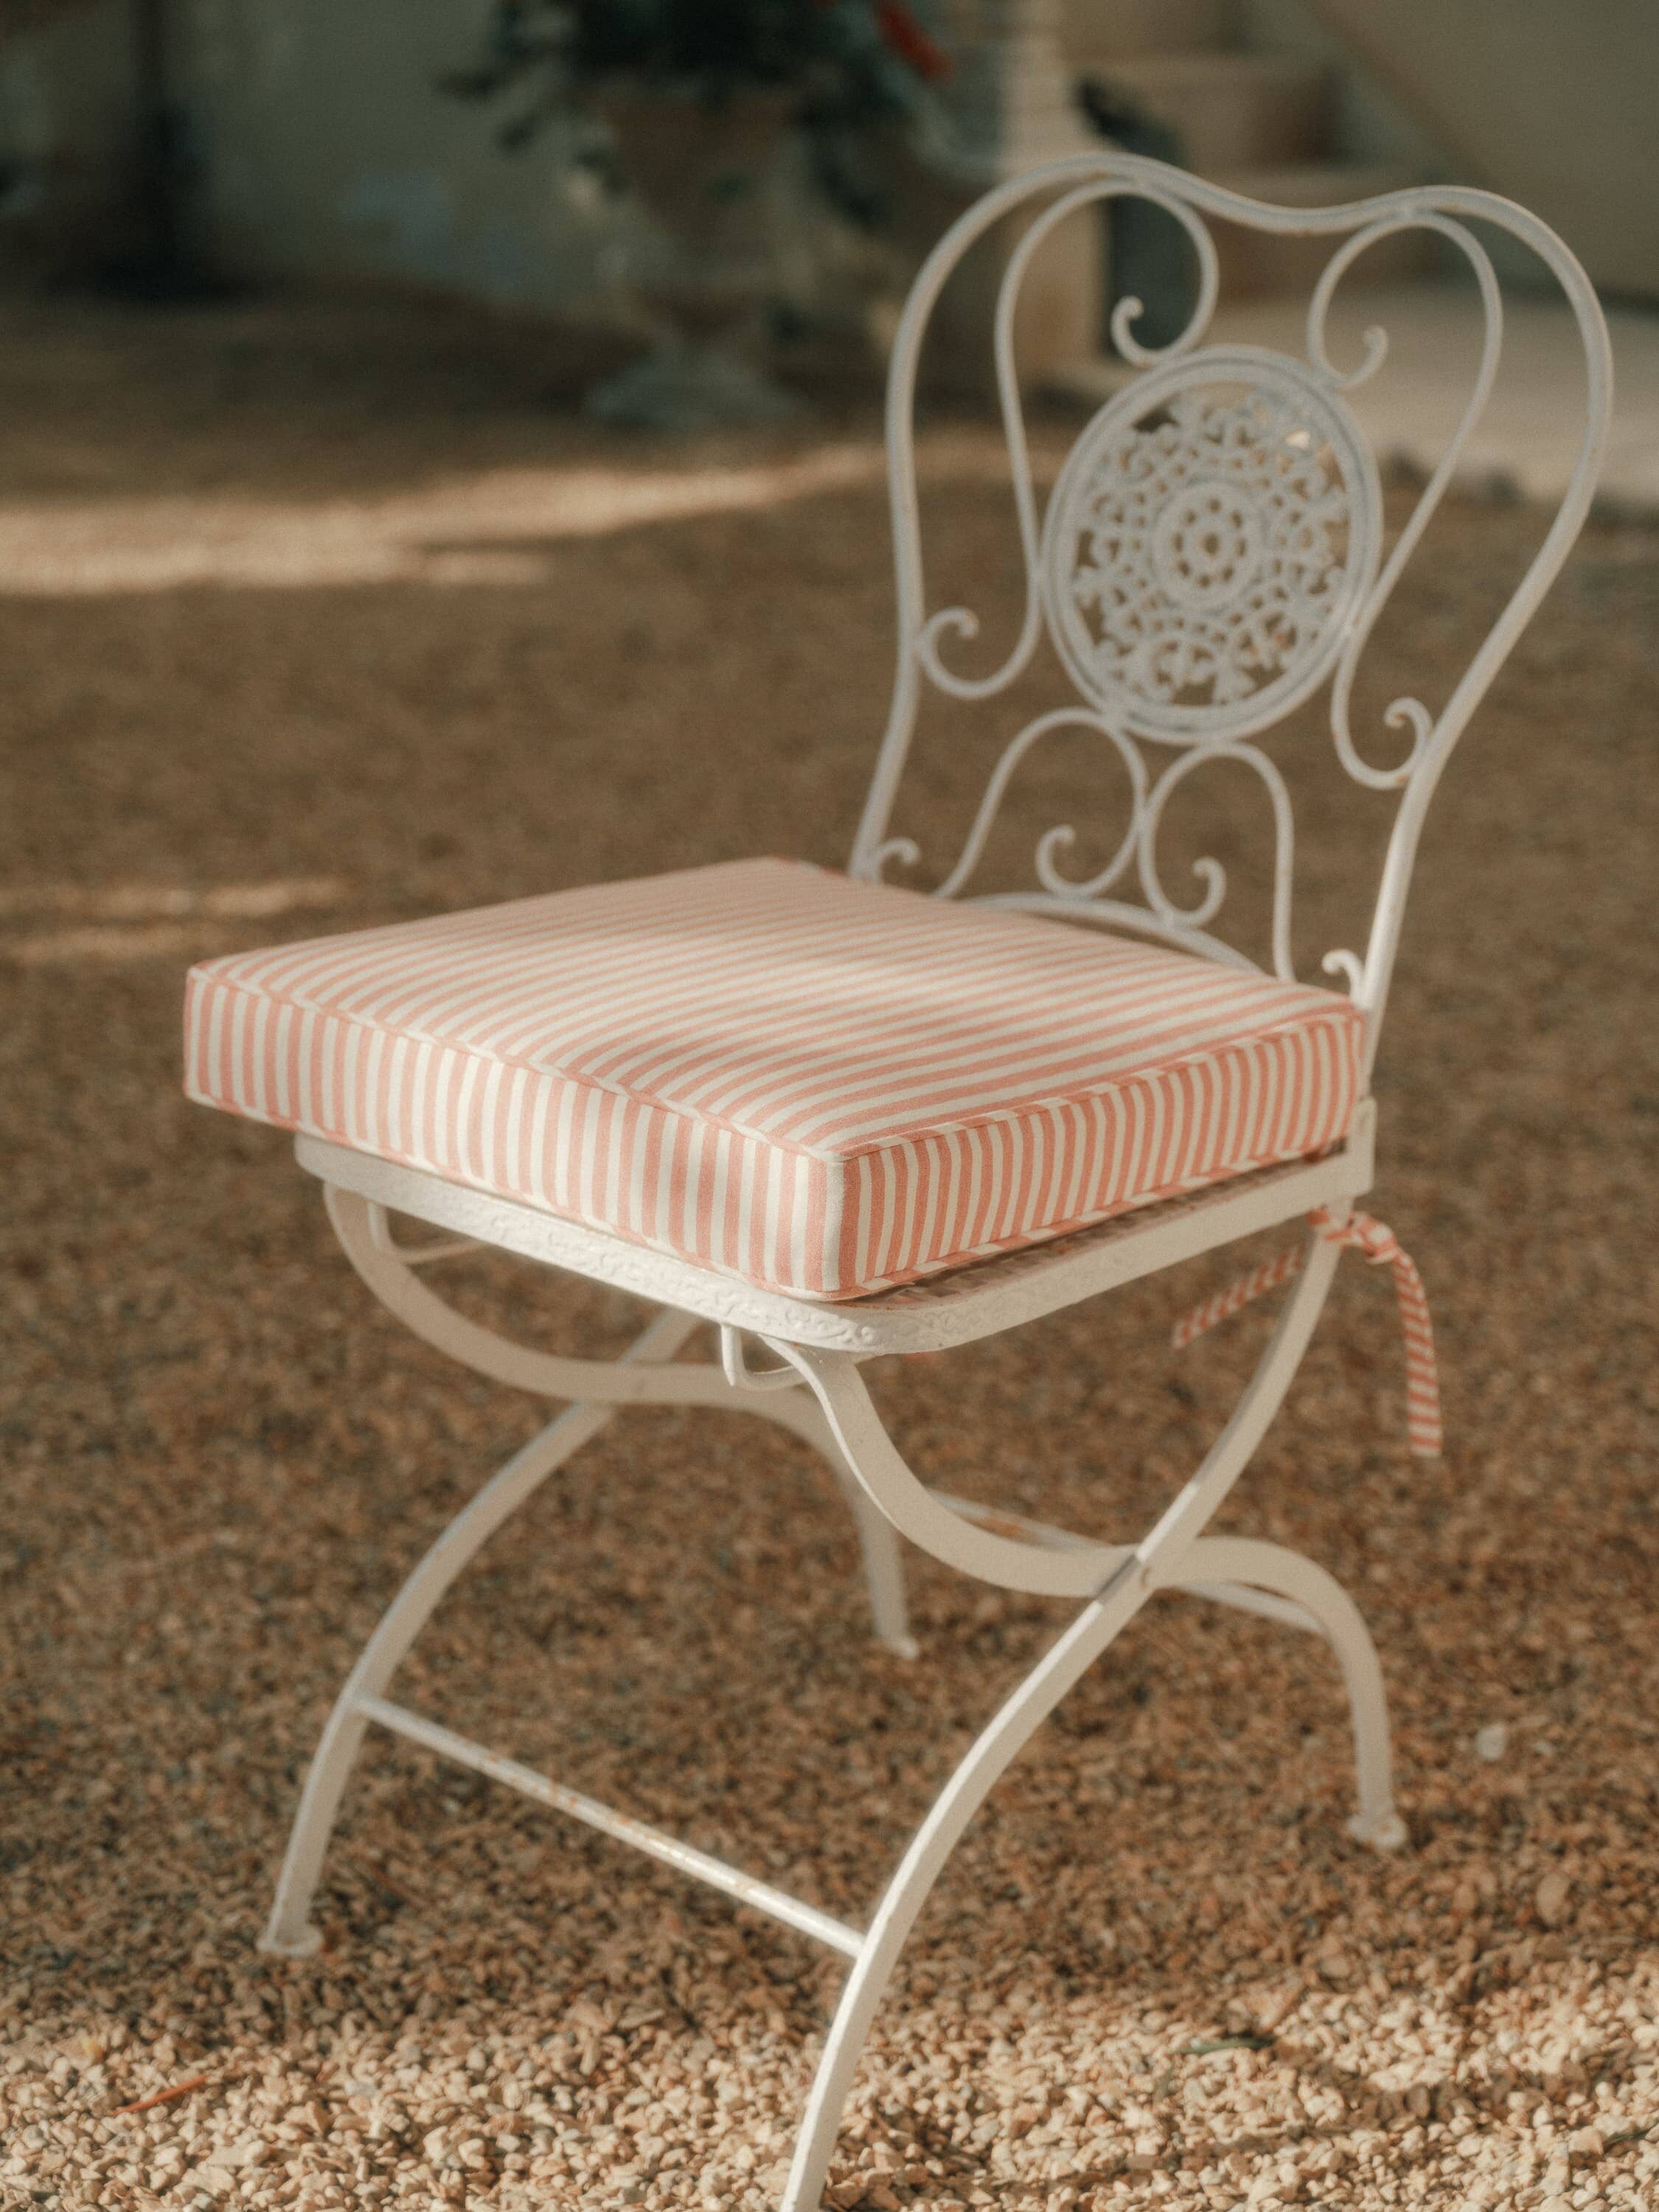 pink seat pillow on metal frame chair